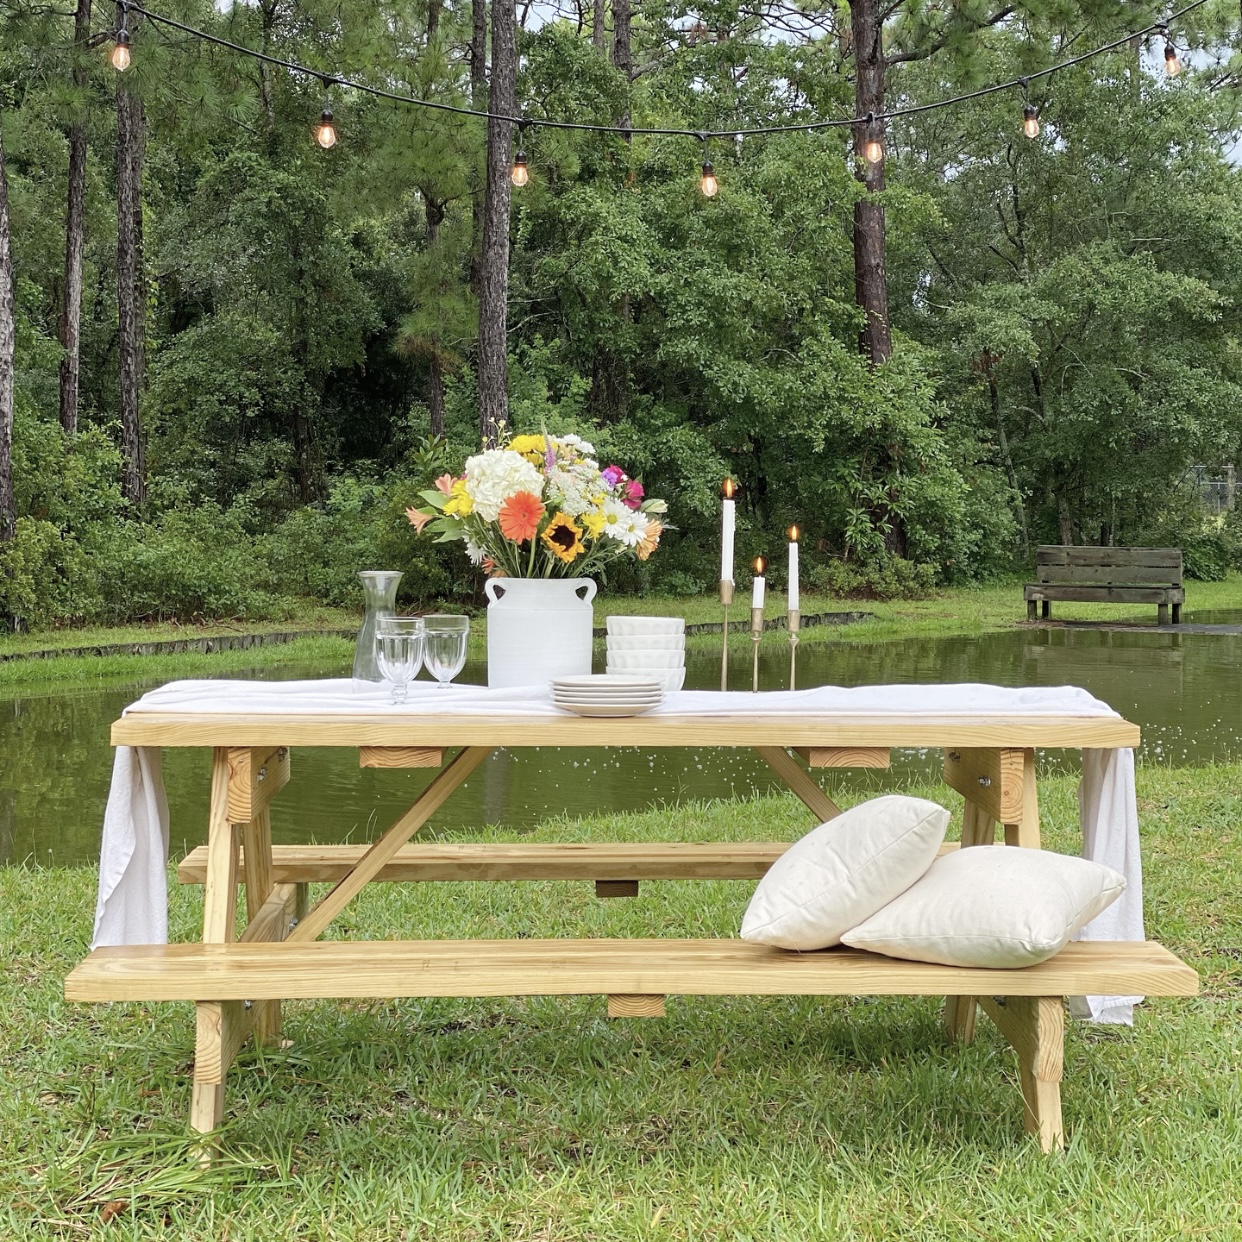 Picnic table next to the pond with a white crock of flowers and white dishes.